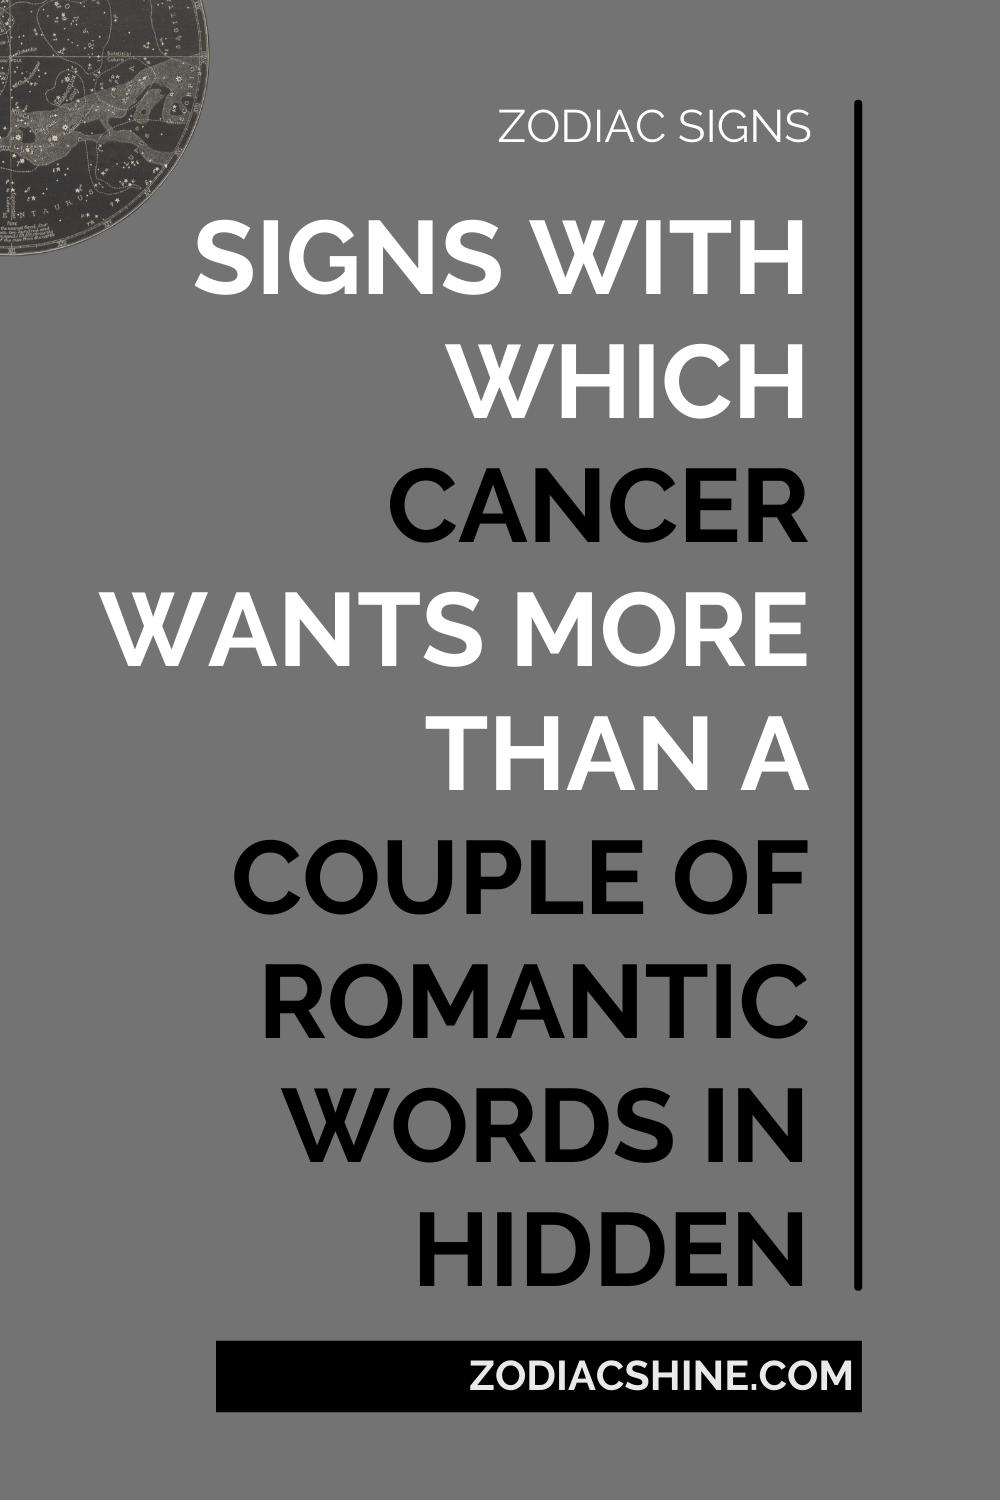 Signs With Which Cancer Wants More Than A Couple Of Romantic Words In Hidden